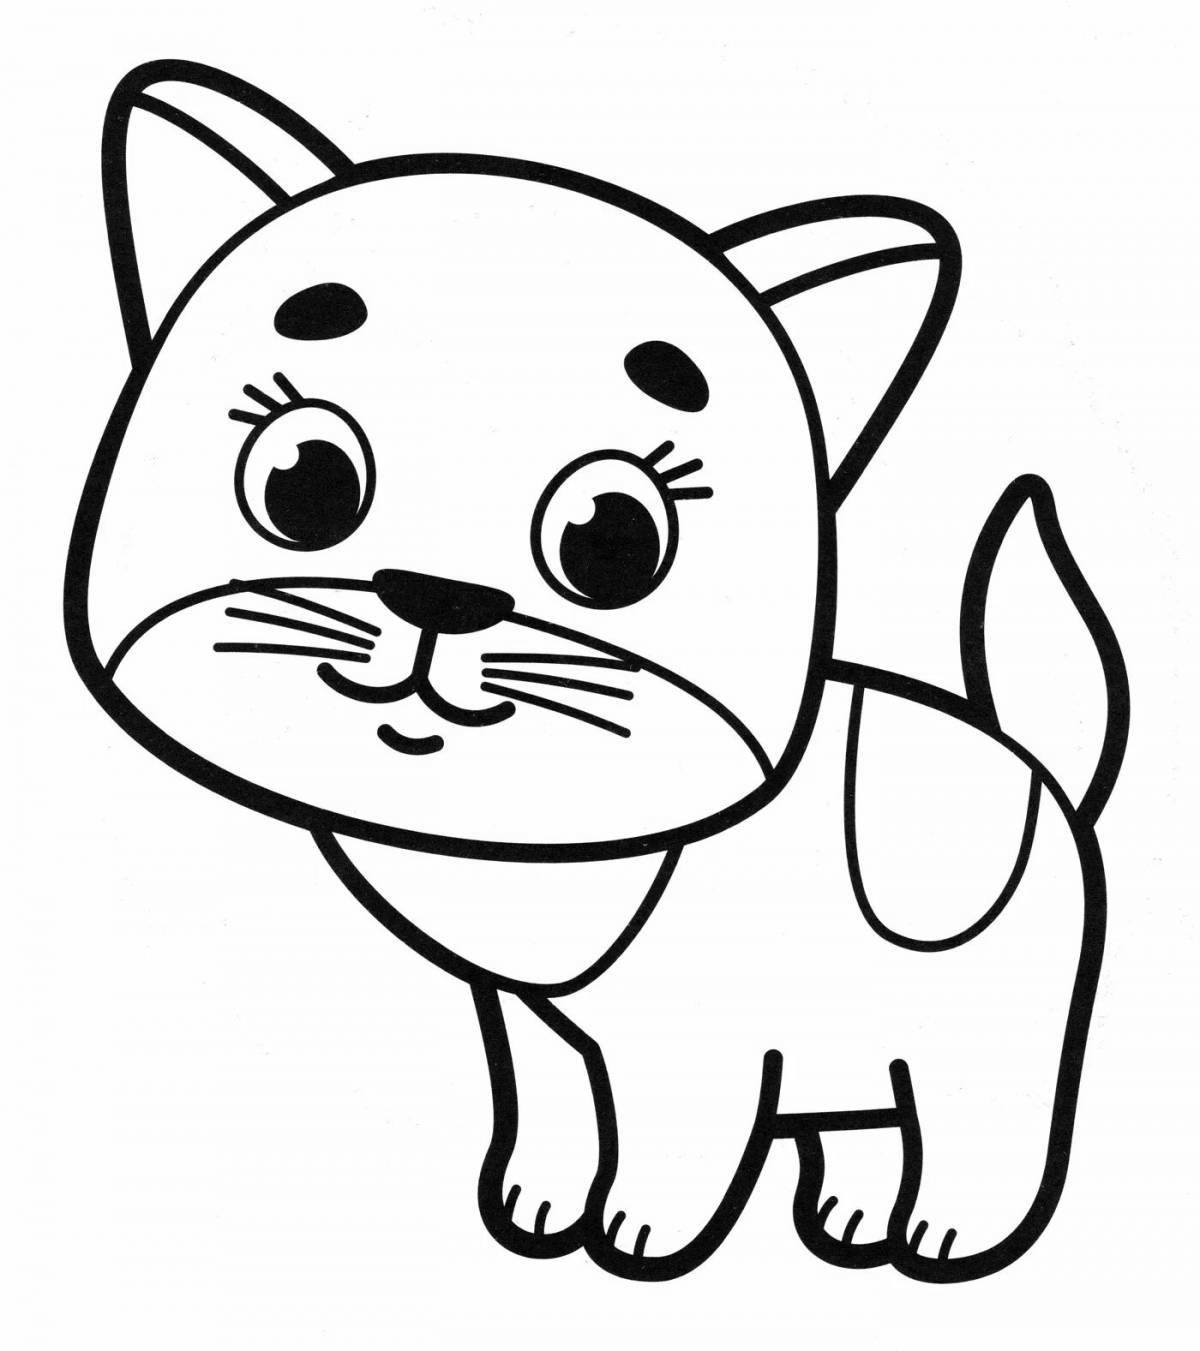 Snuggly kitten coloring page